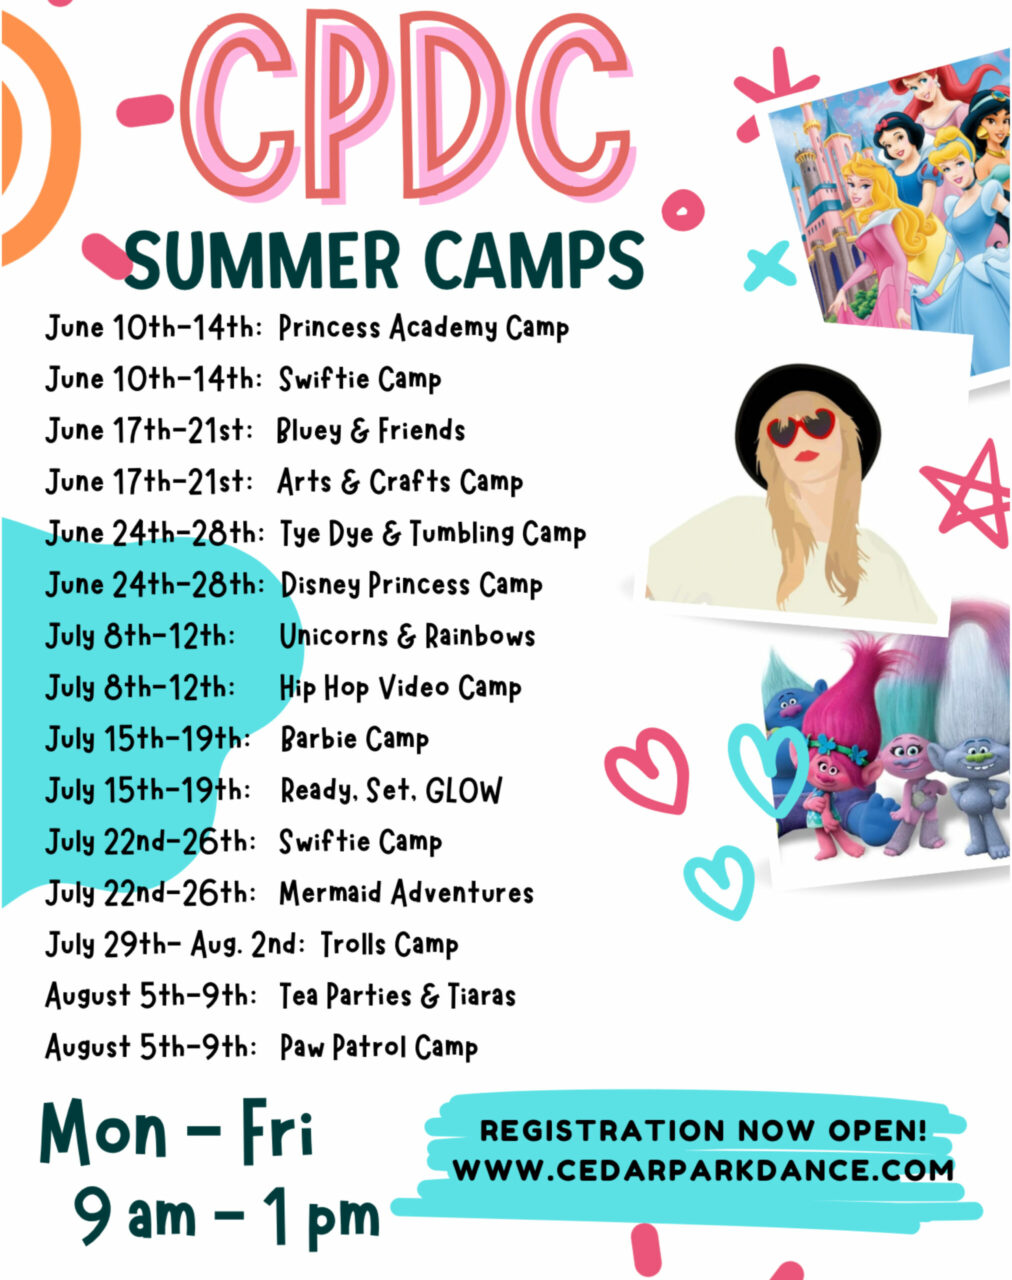 CPDC Summer Camps